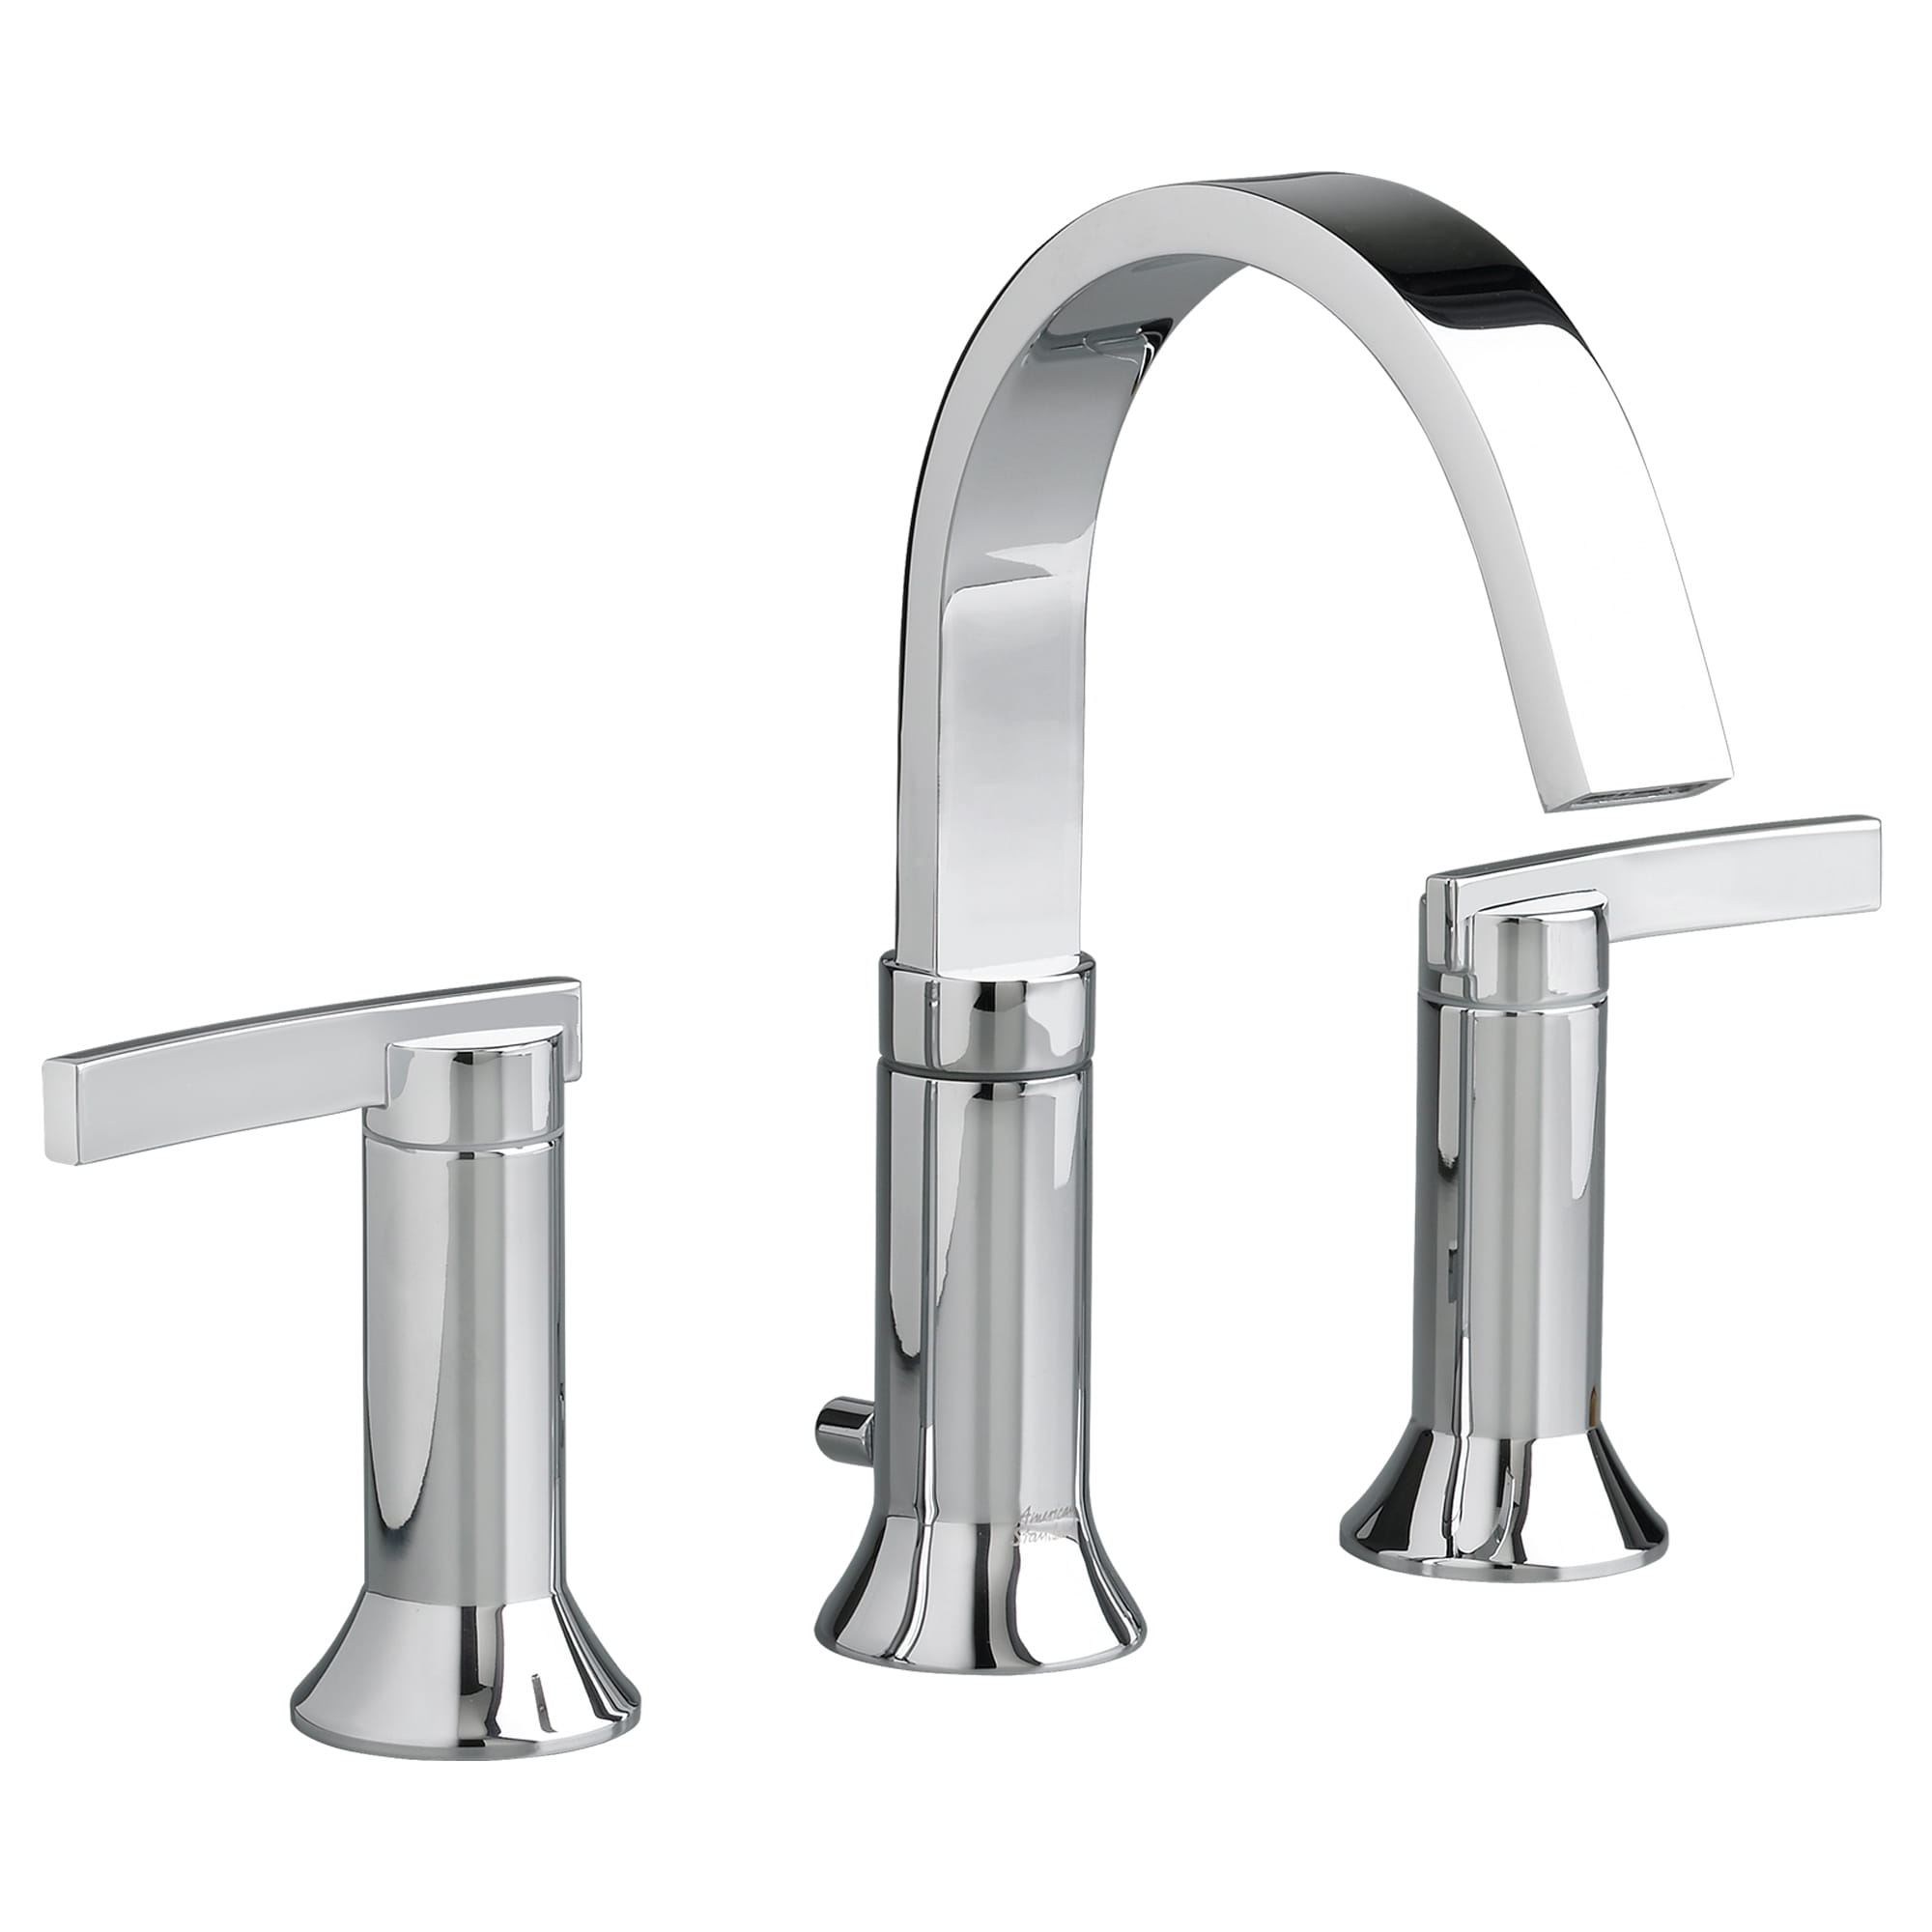 Berwick® 8-Inch Widespread 2-Handle Bathroom Faucet 1.2 gpm/4.5 L/min With Lever Handles